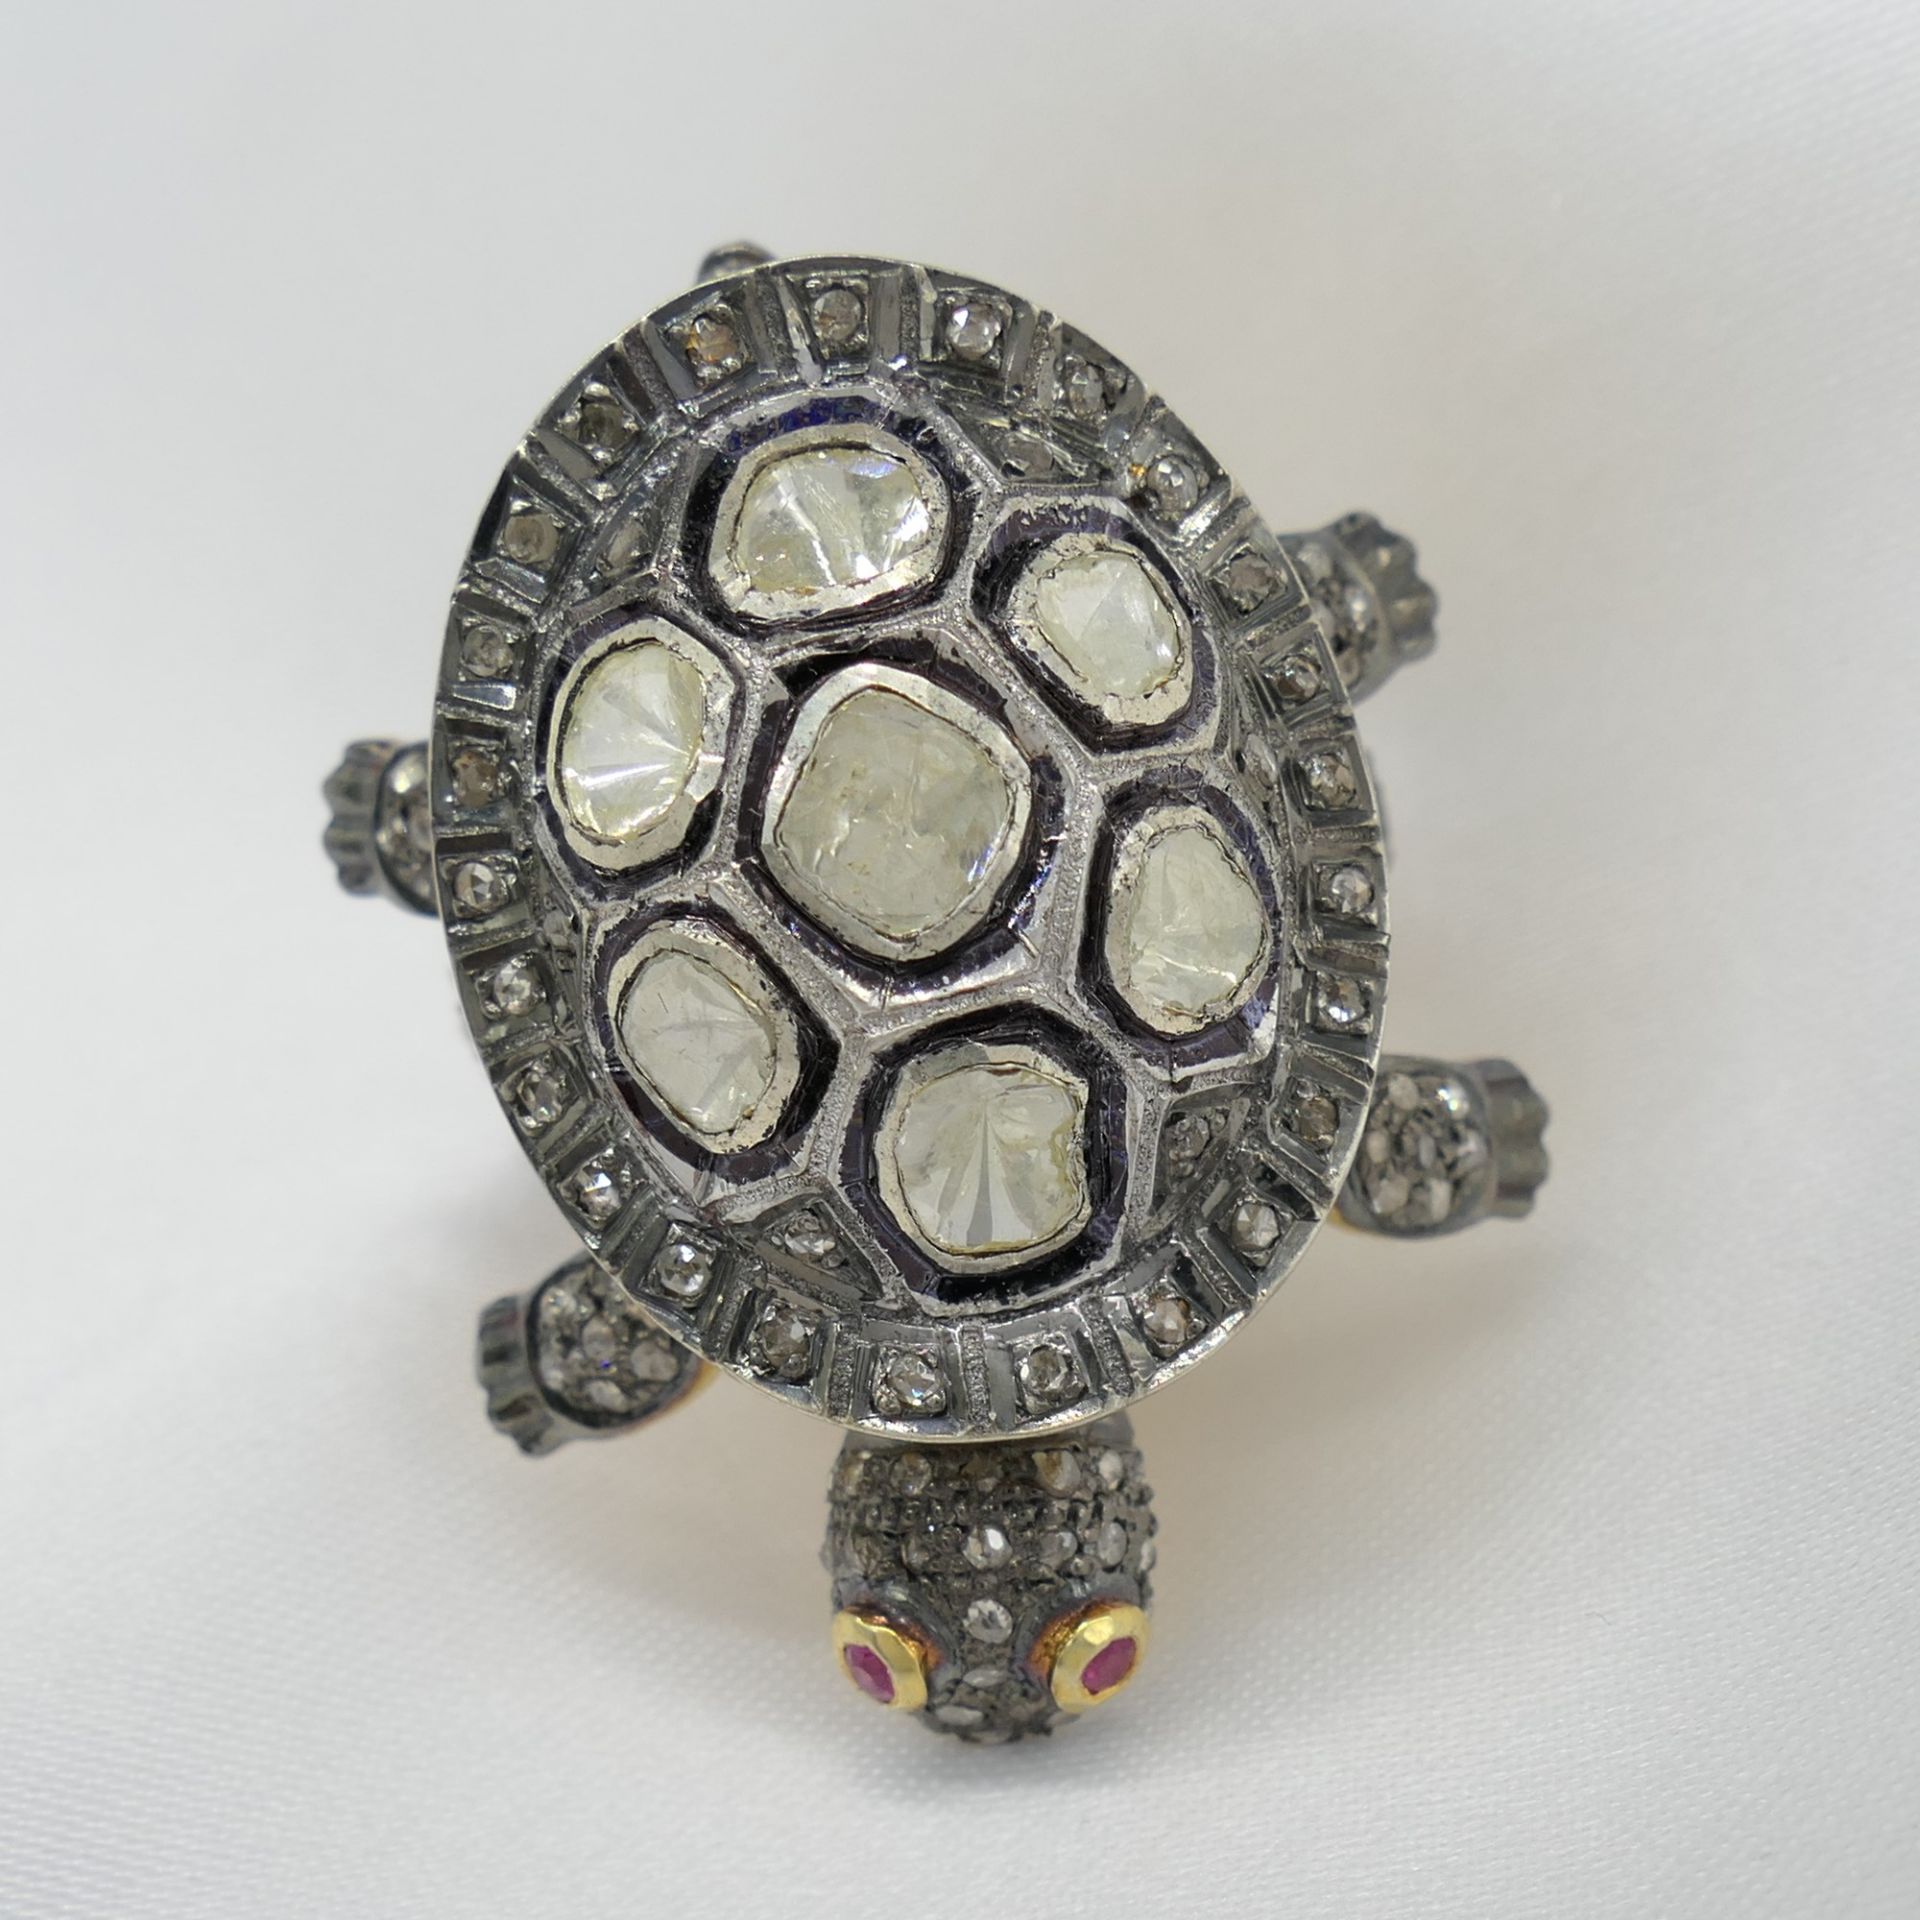 Distinctive 1.30 Carat Diamond and Ruby Tortoise Ring With Movable Body Parts - Image 4 of 6